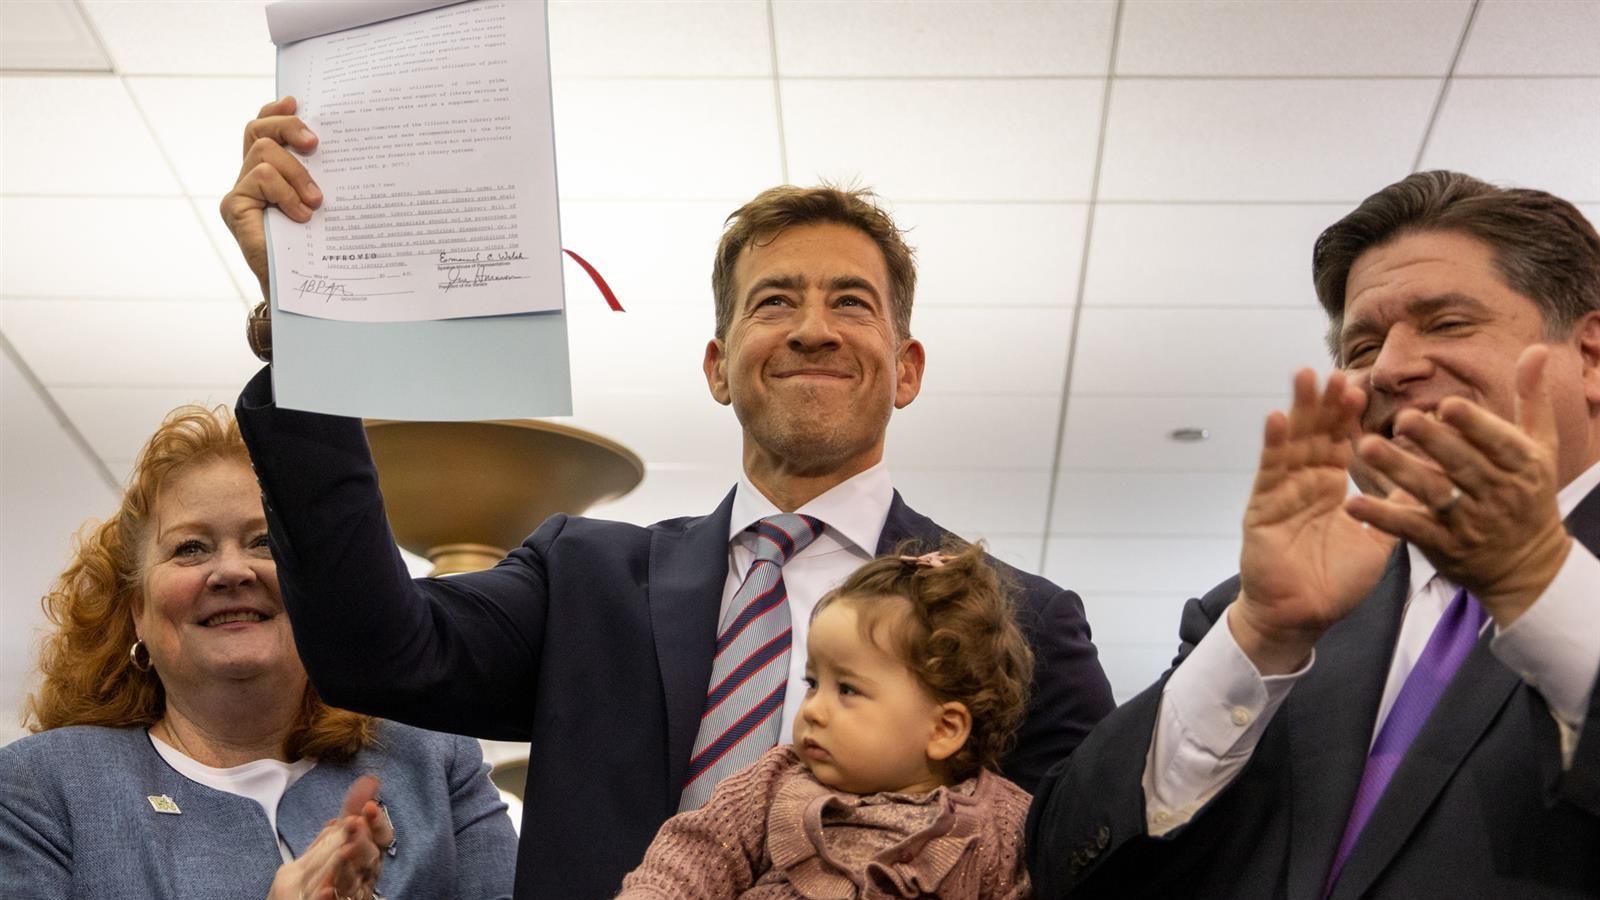 Illinois Secretary of State Alexi Giannoulias holds his daughter while brandishing a bill signed by Gov. J.B. Pritzker on June 12, 2023, that aims to discourage book bans at Illinois libraries. Bill sponsor Sen. Laura Murphy, D-Des Plaines, is pictured at left and Pritzker is pictured at right. (Capitol News Illinois photo by Andrew Adams)